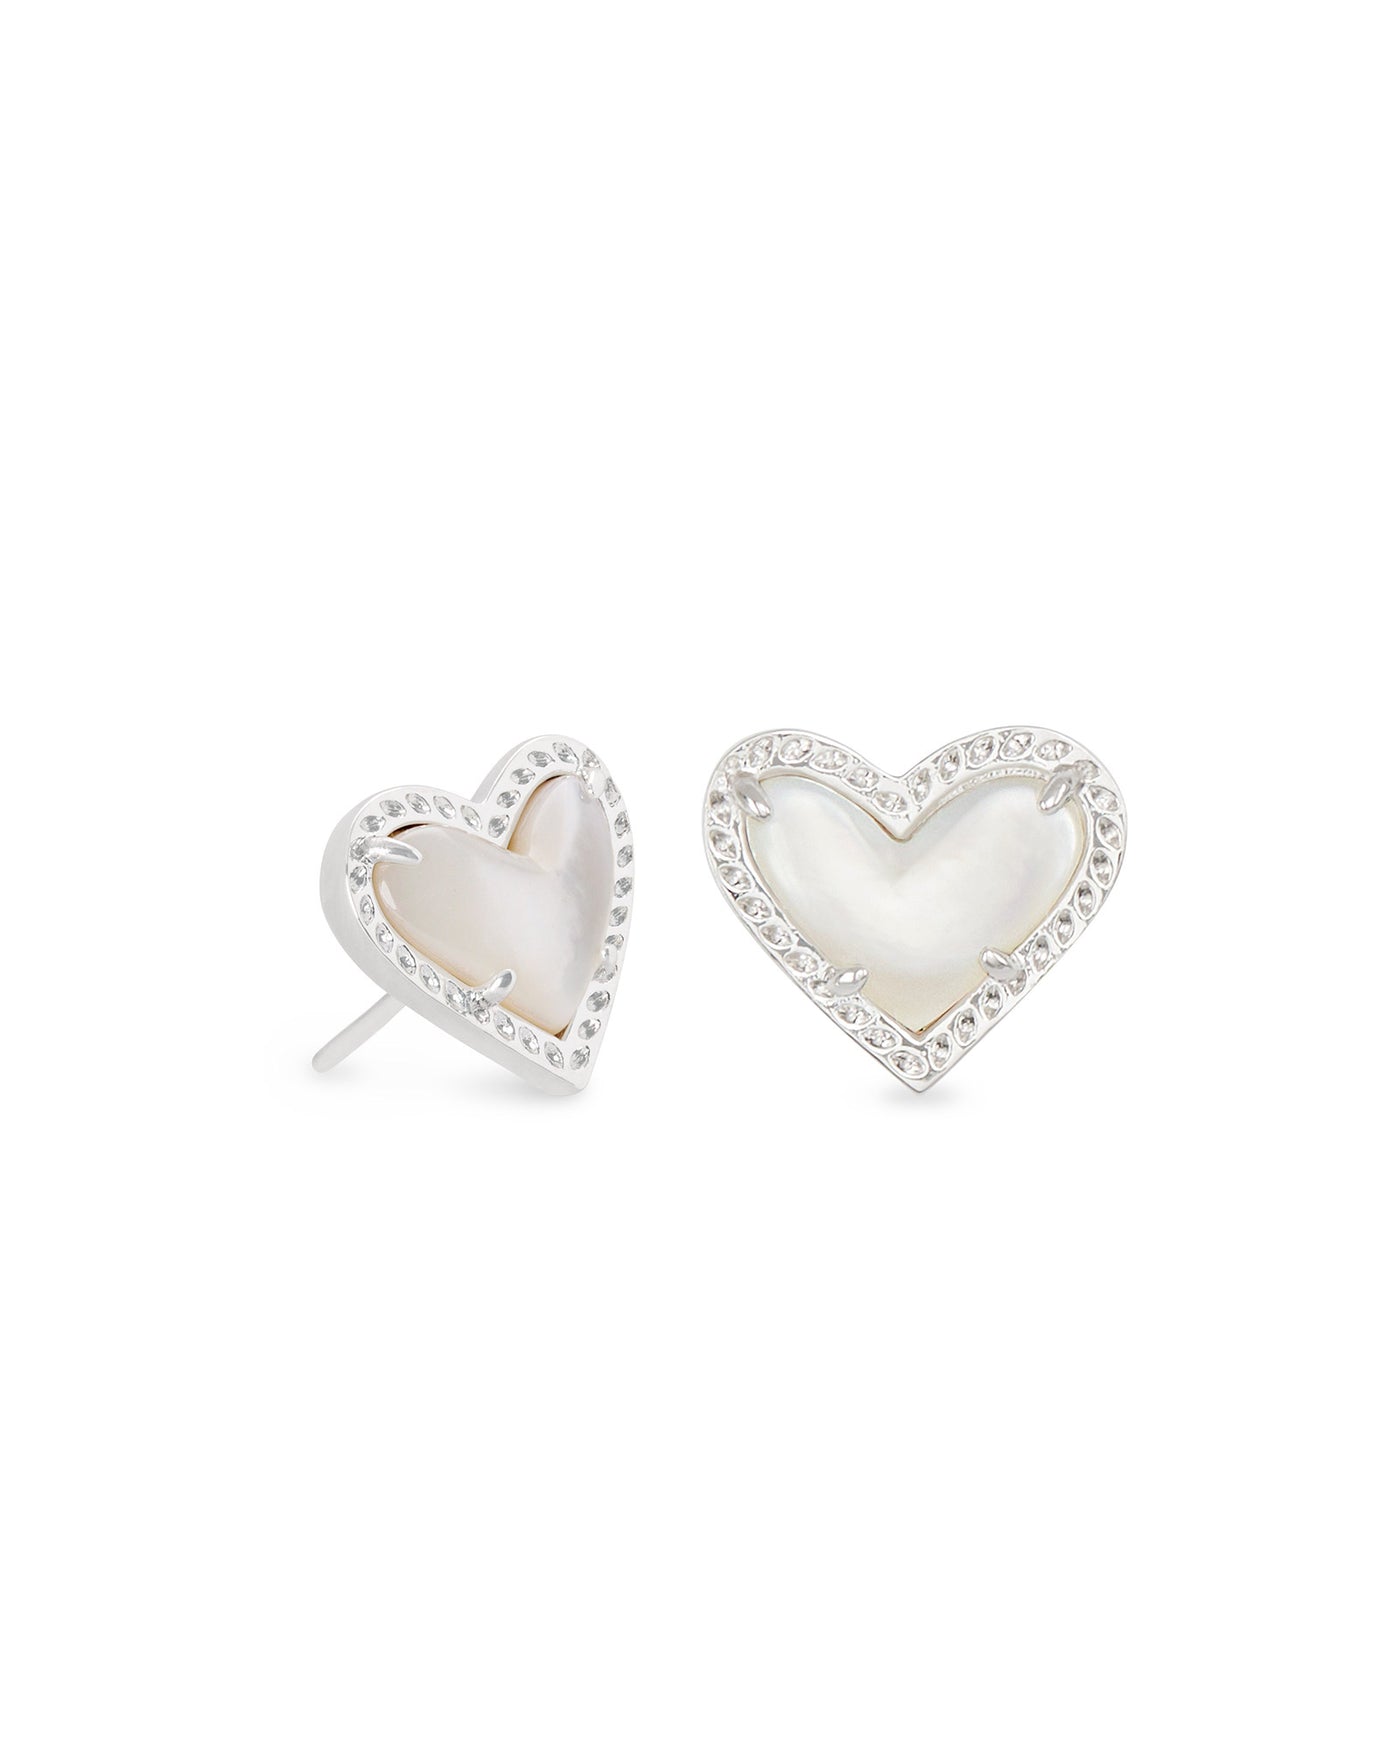 Ari Heart Stud Earrings Silver Mother of Pearl on white background, front view.